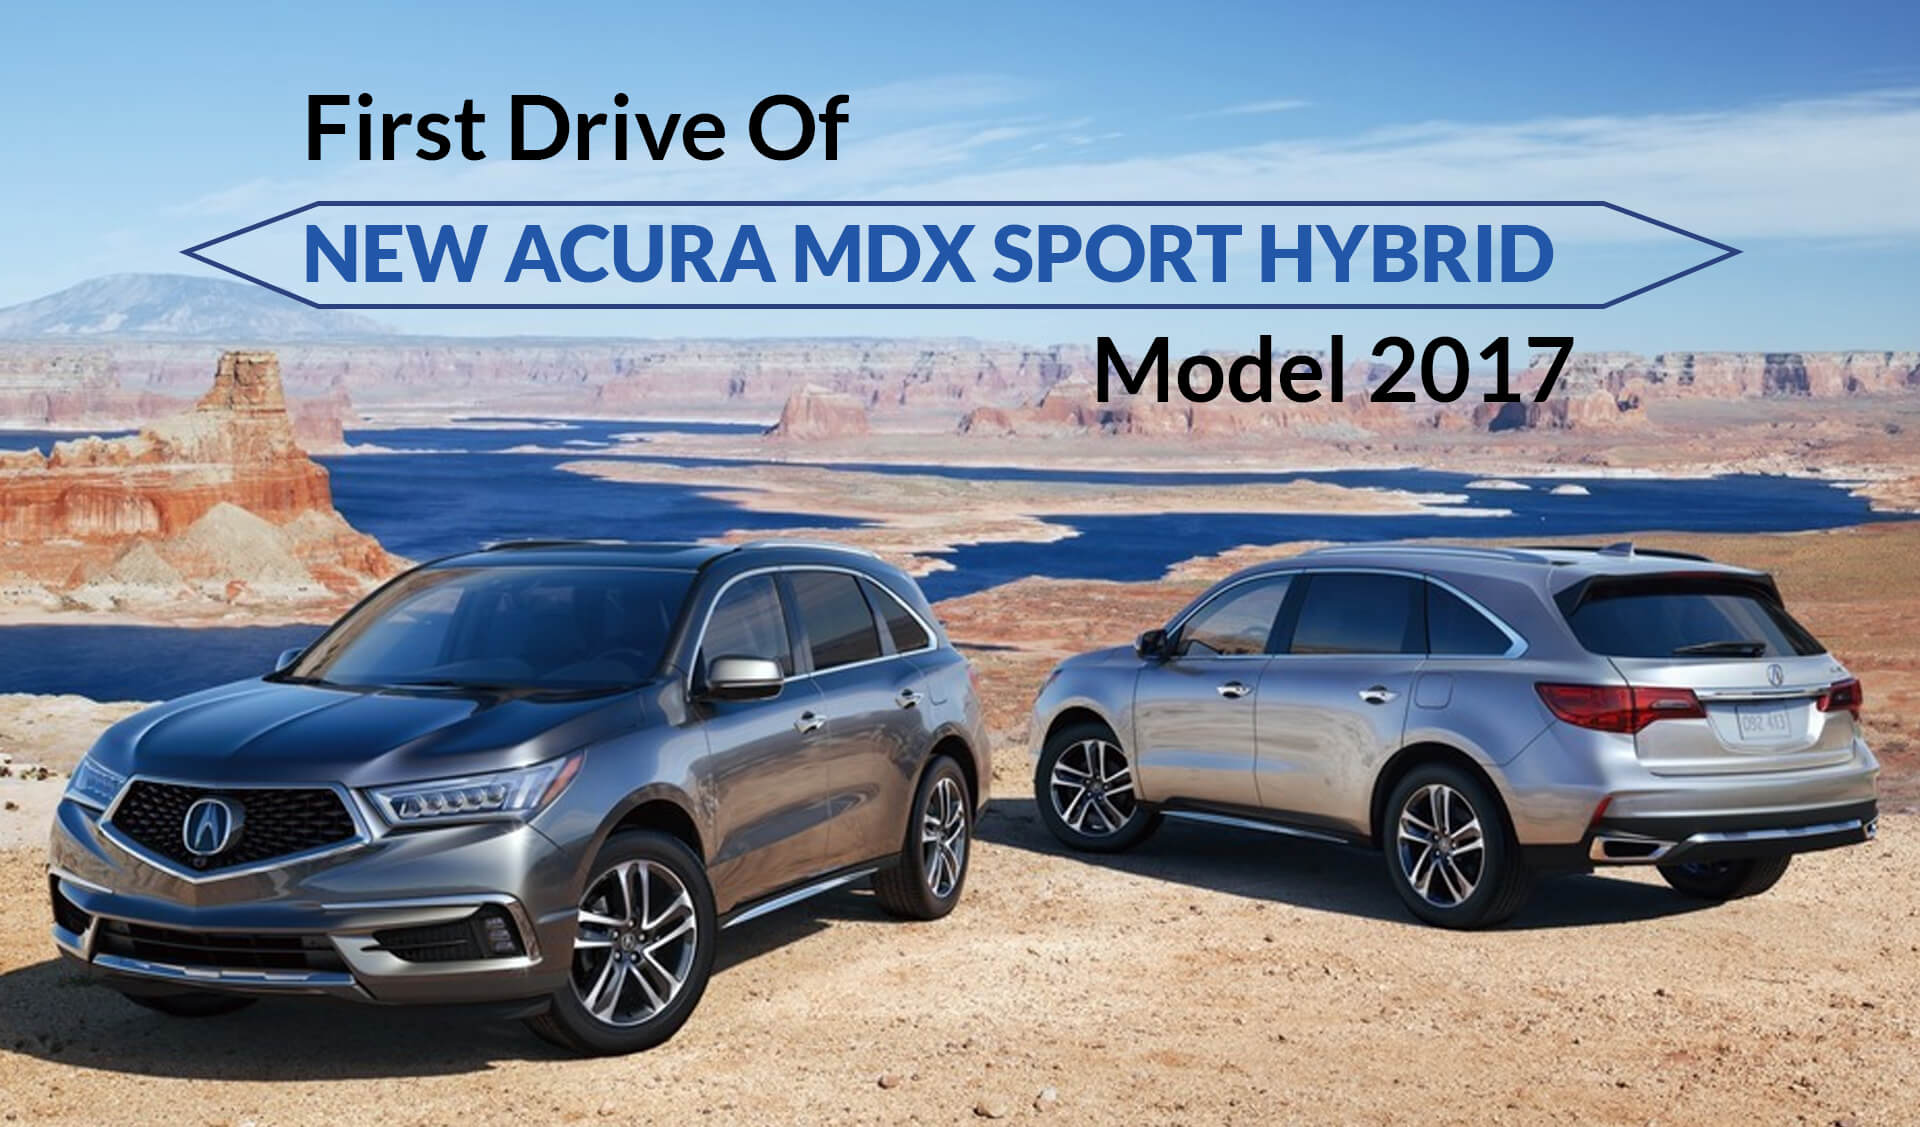 First Drive Of New Acura MDX Sport Hybrid Model 2017